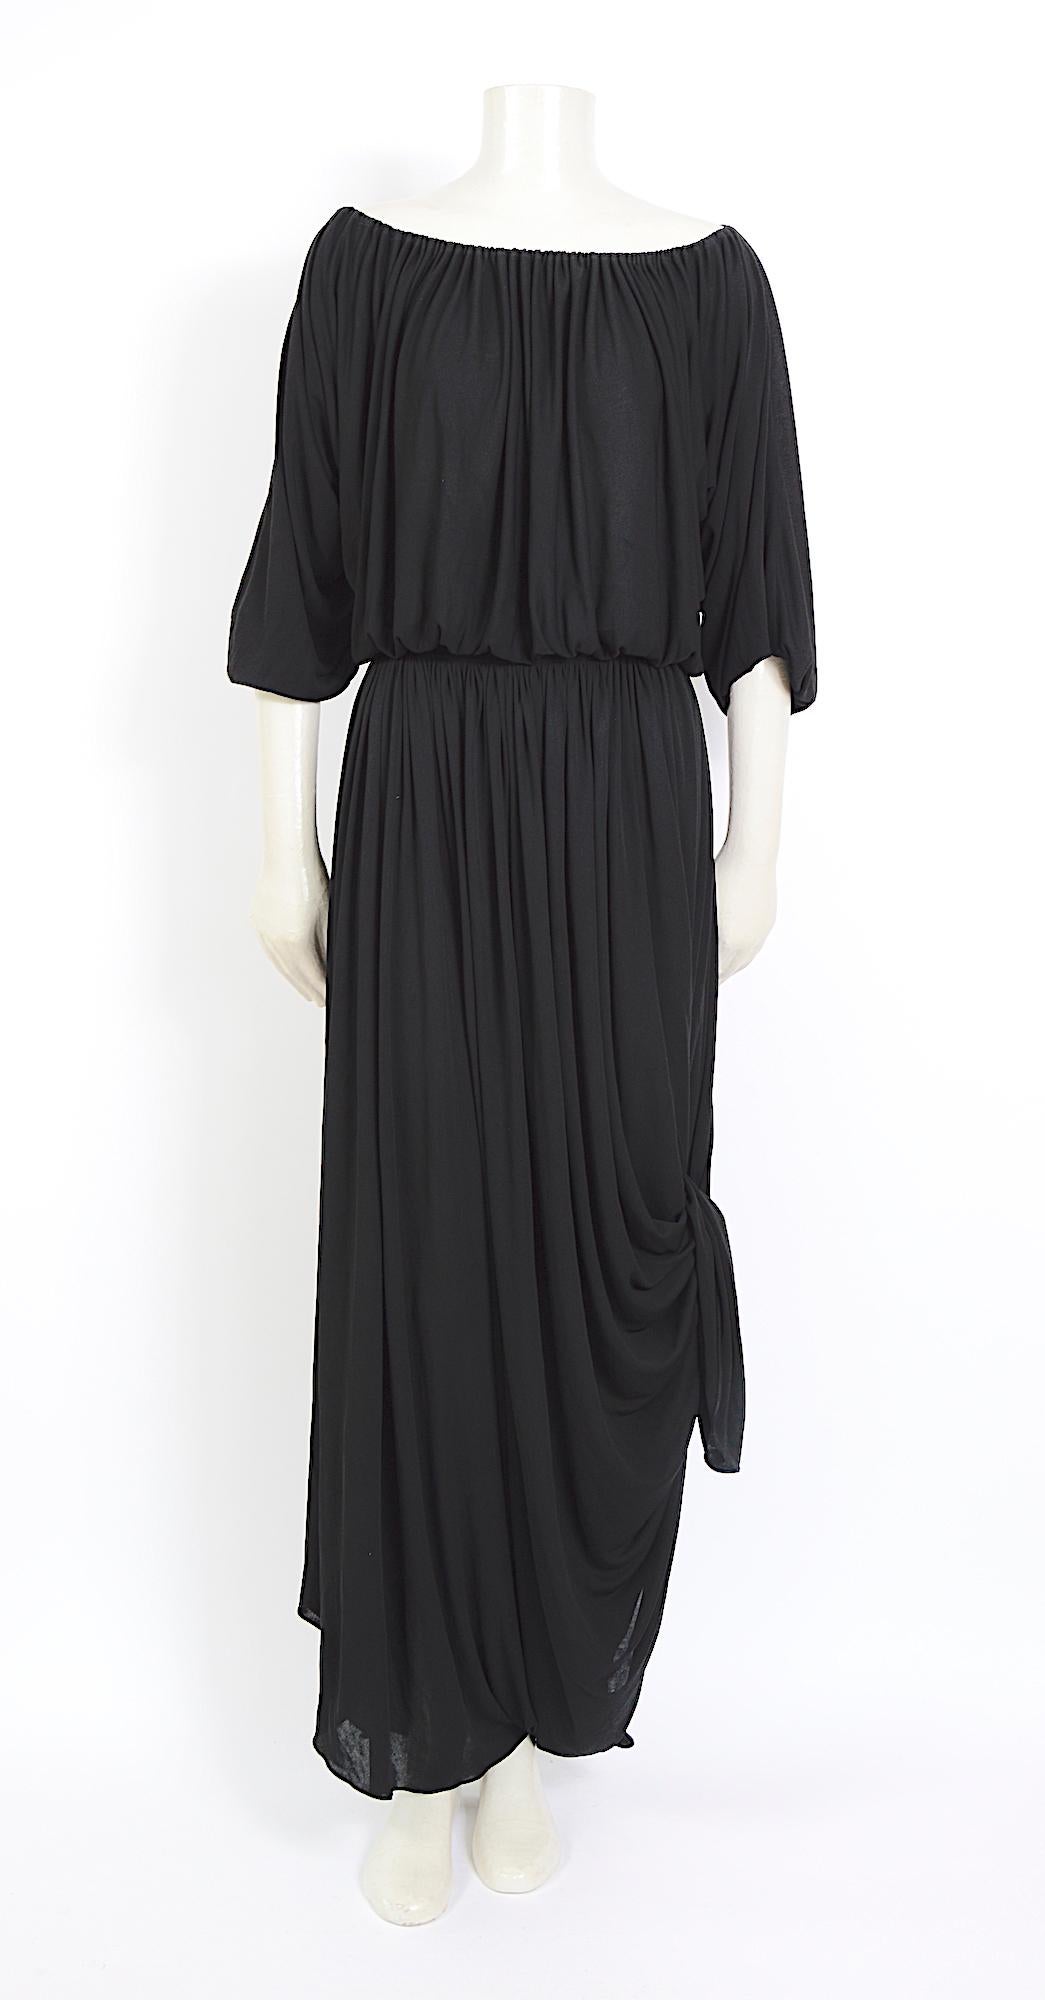 Collectible vintage Nina Ricci 1970s dress.
I love the draping styling options on this vintage 1970s Nina Ricci dress. Made in a beautiful black viscose jersey dress. A few tiny pin-size holes, are hard to find and lost in the drapes of the dress.